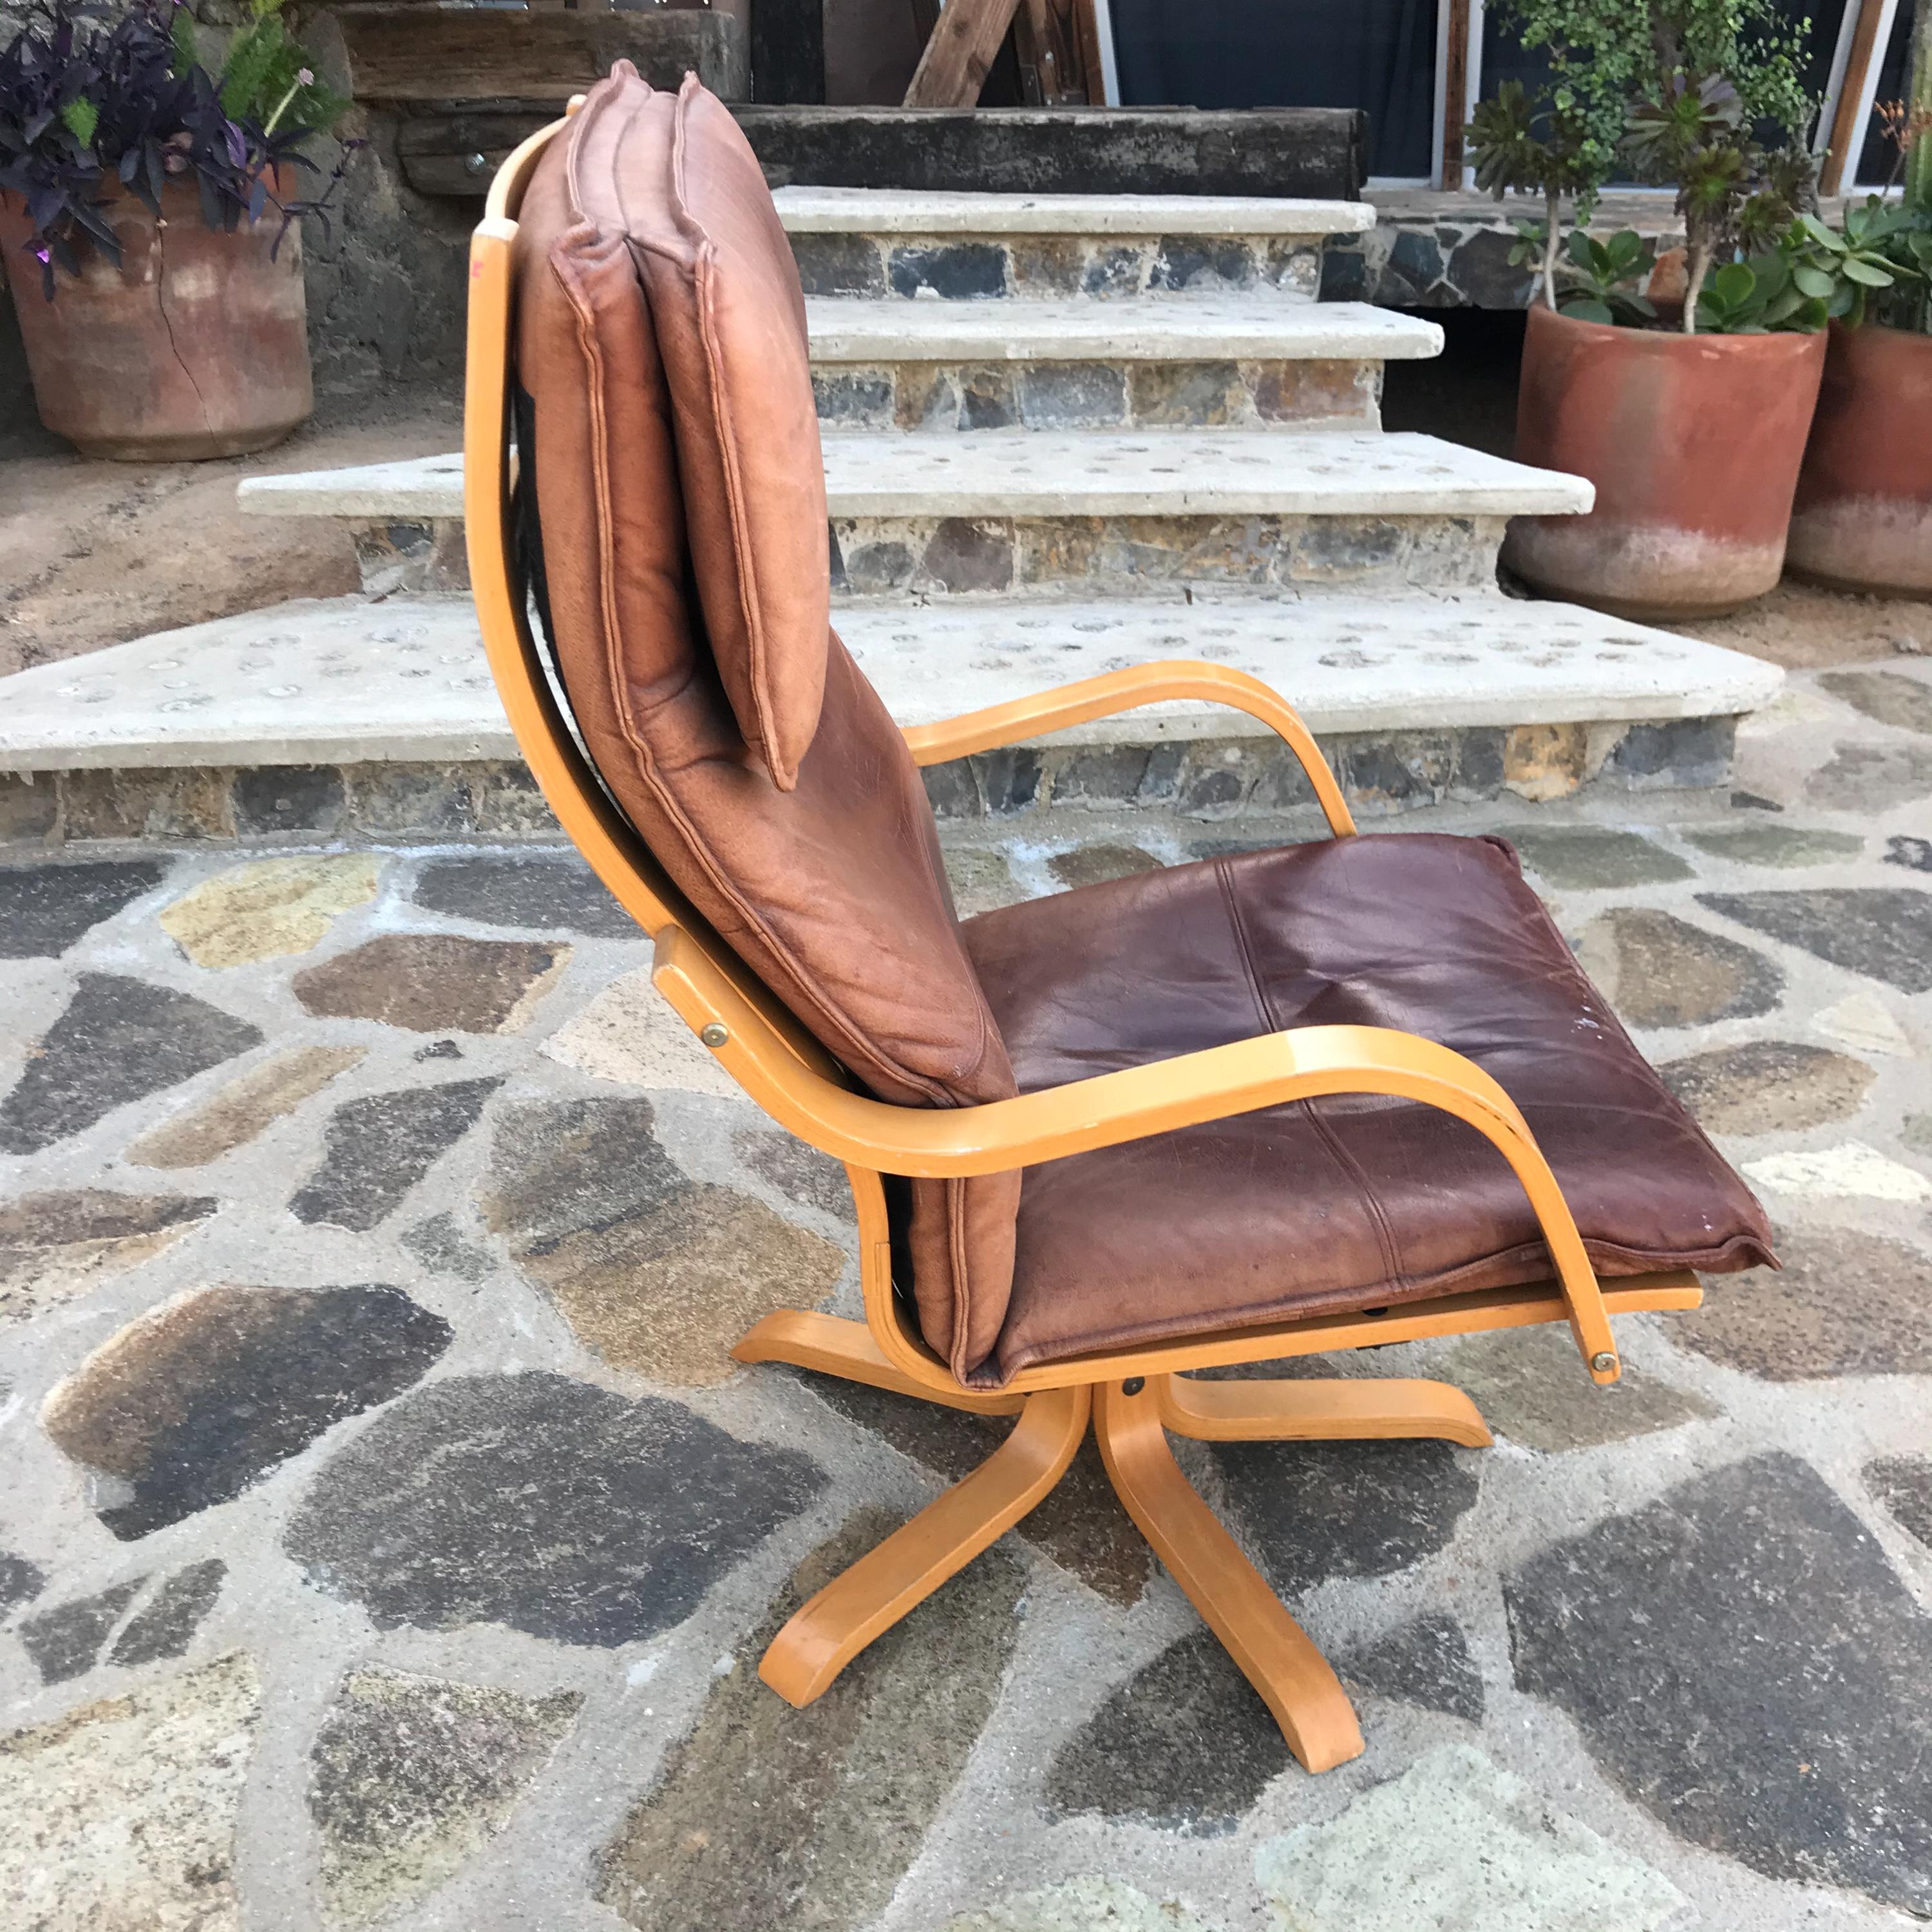 Mid-20th Century Italian Swiss Tall Lounge Chairs Aged Leather Blonde Wood Star Base 1960s Modern